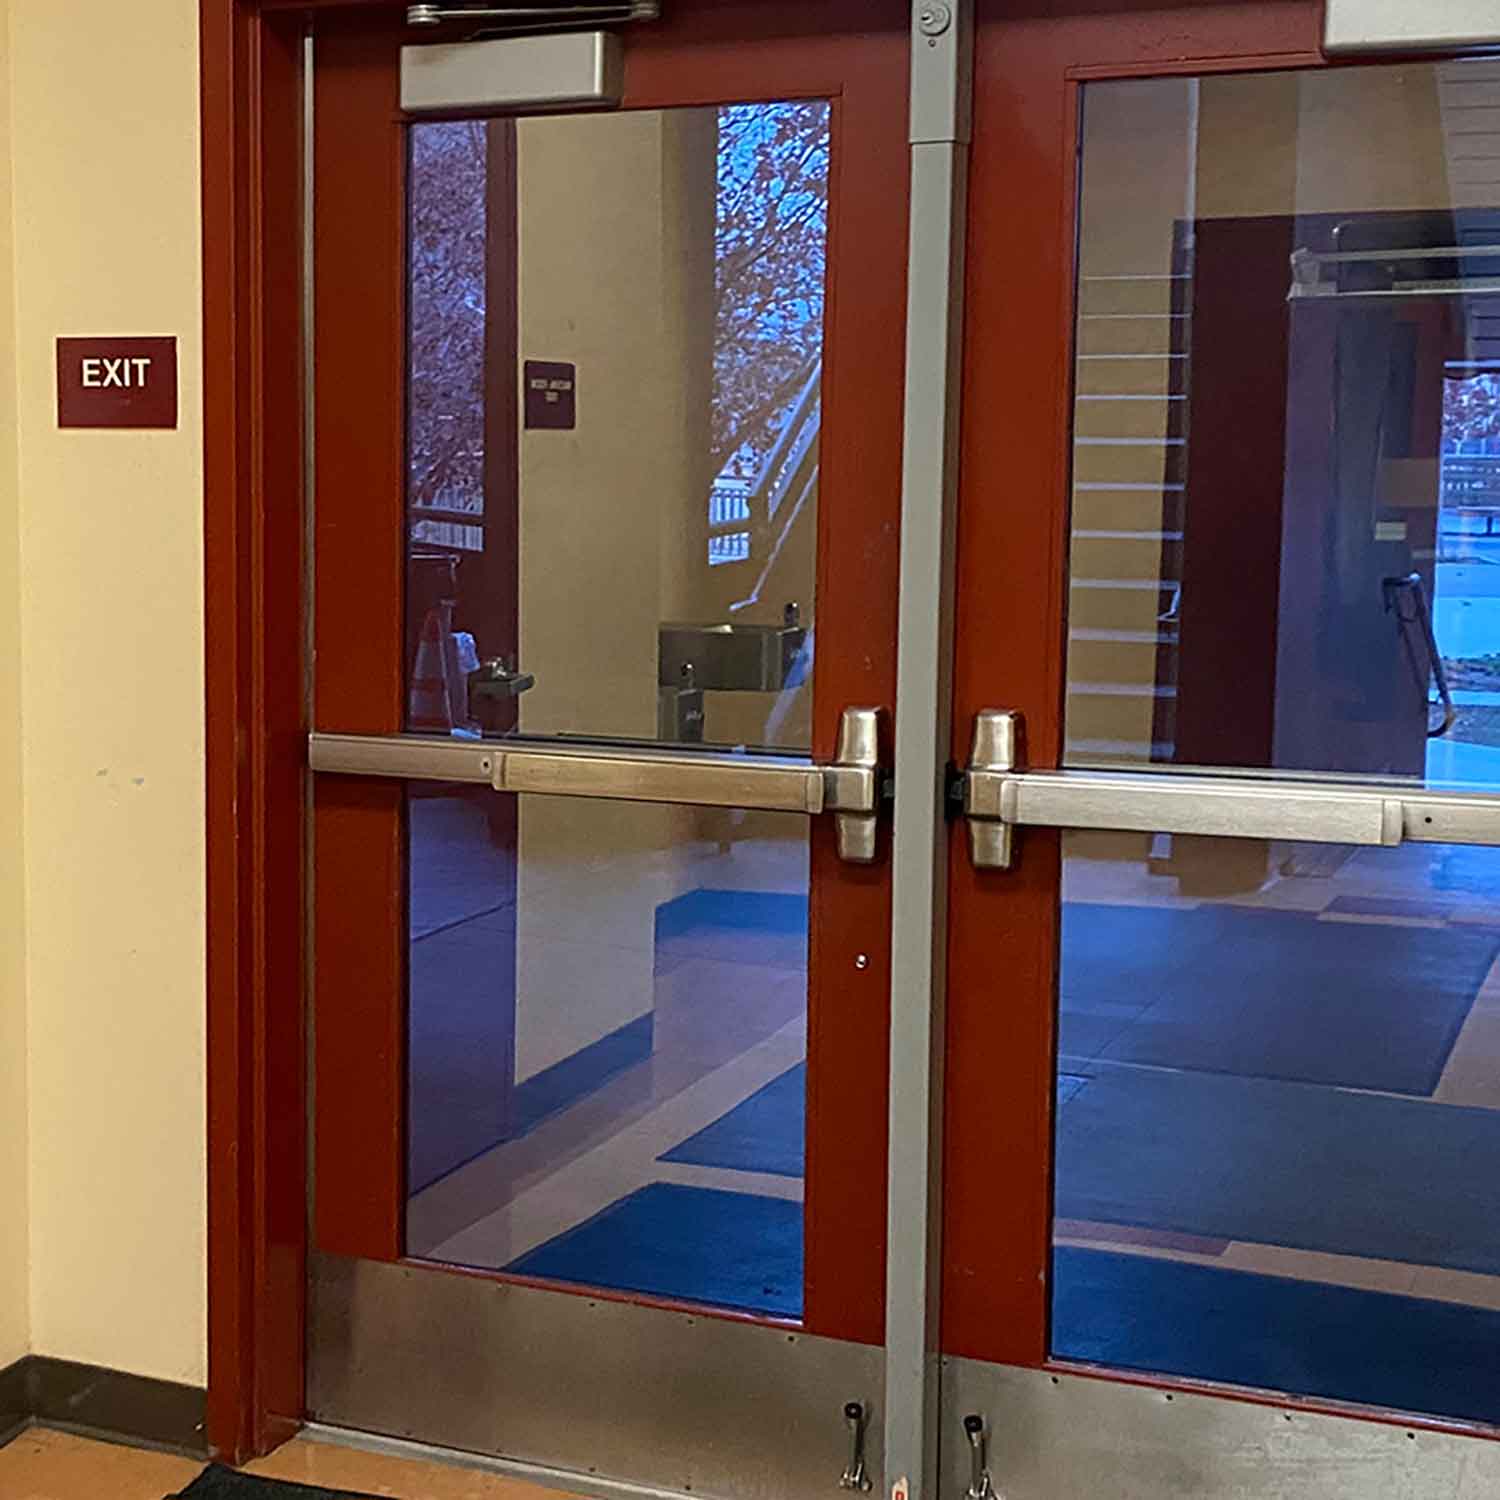 ClimatePro installed 3M window film for a school in San Rafael, CA. Get a free estimate today.